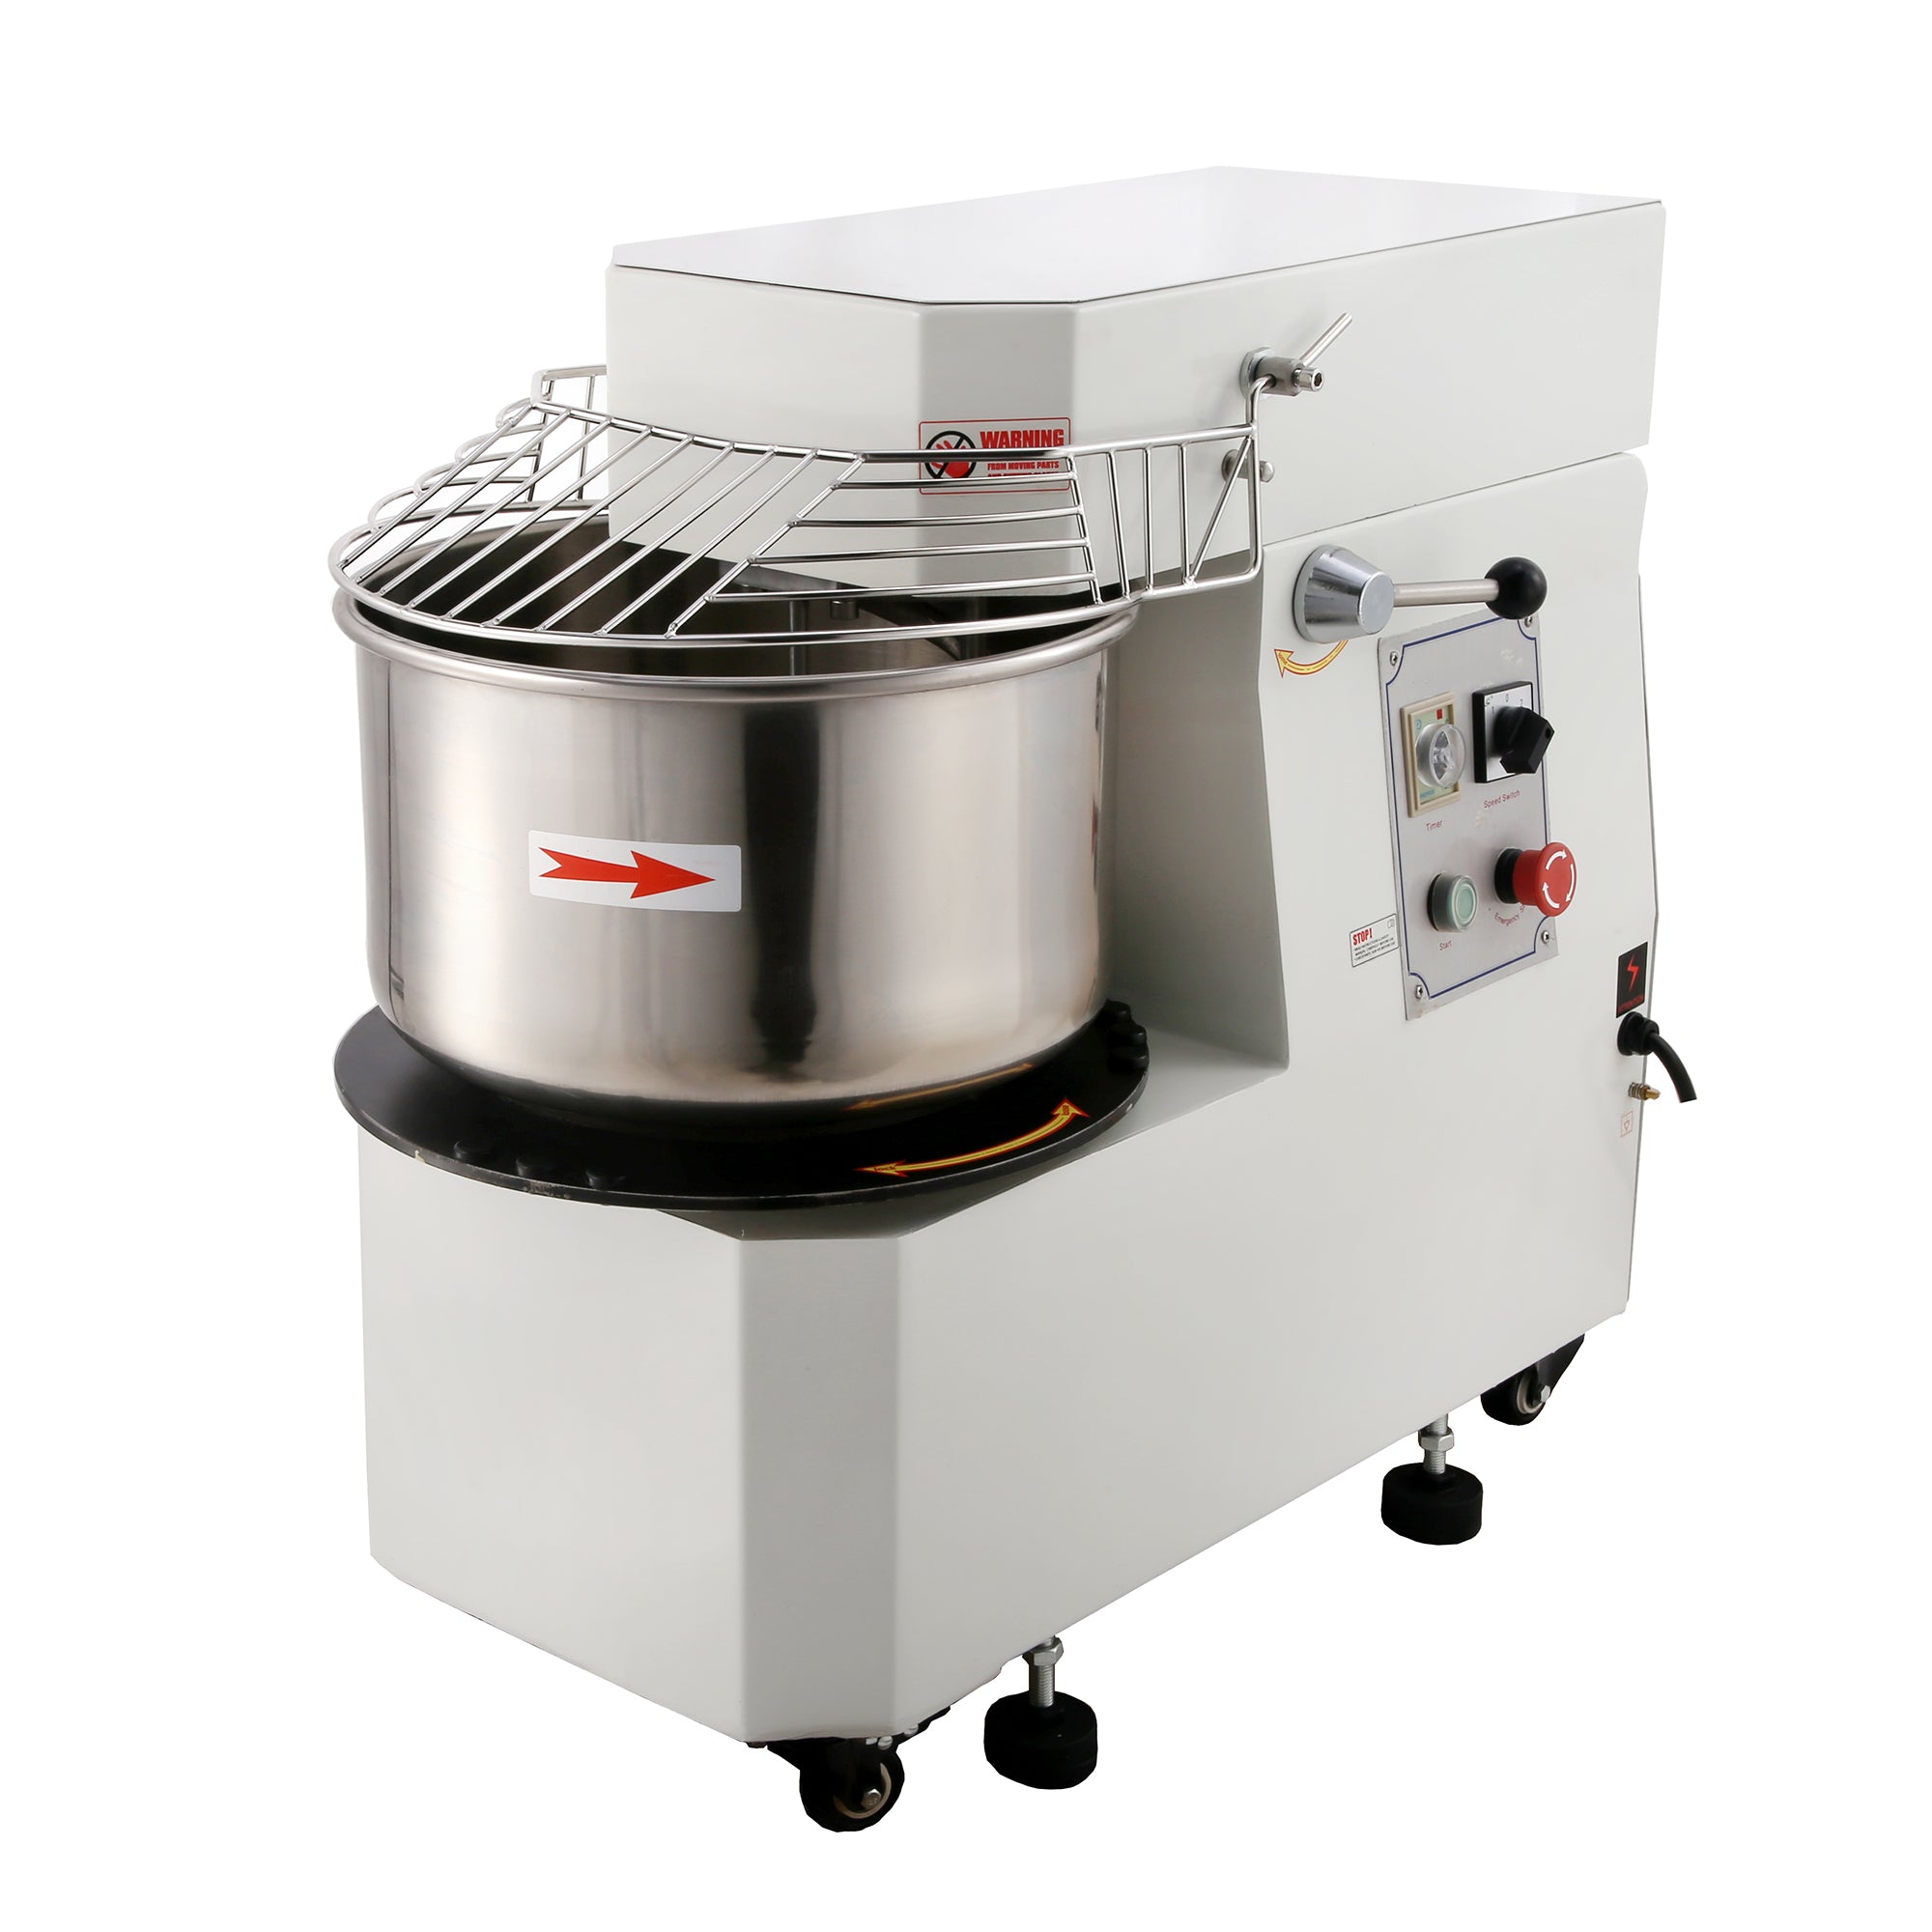 Hakka Commercial Dough Mixers 20 Quart Stainless Steel 2 Speed Rising  Spiral Mixers-HTD20B(220V/60Hz,3 Phase)